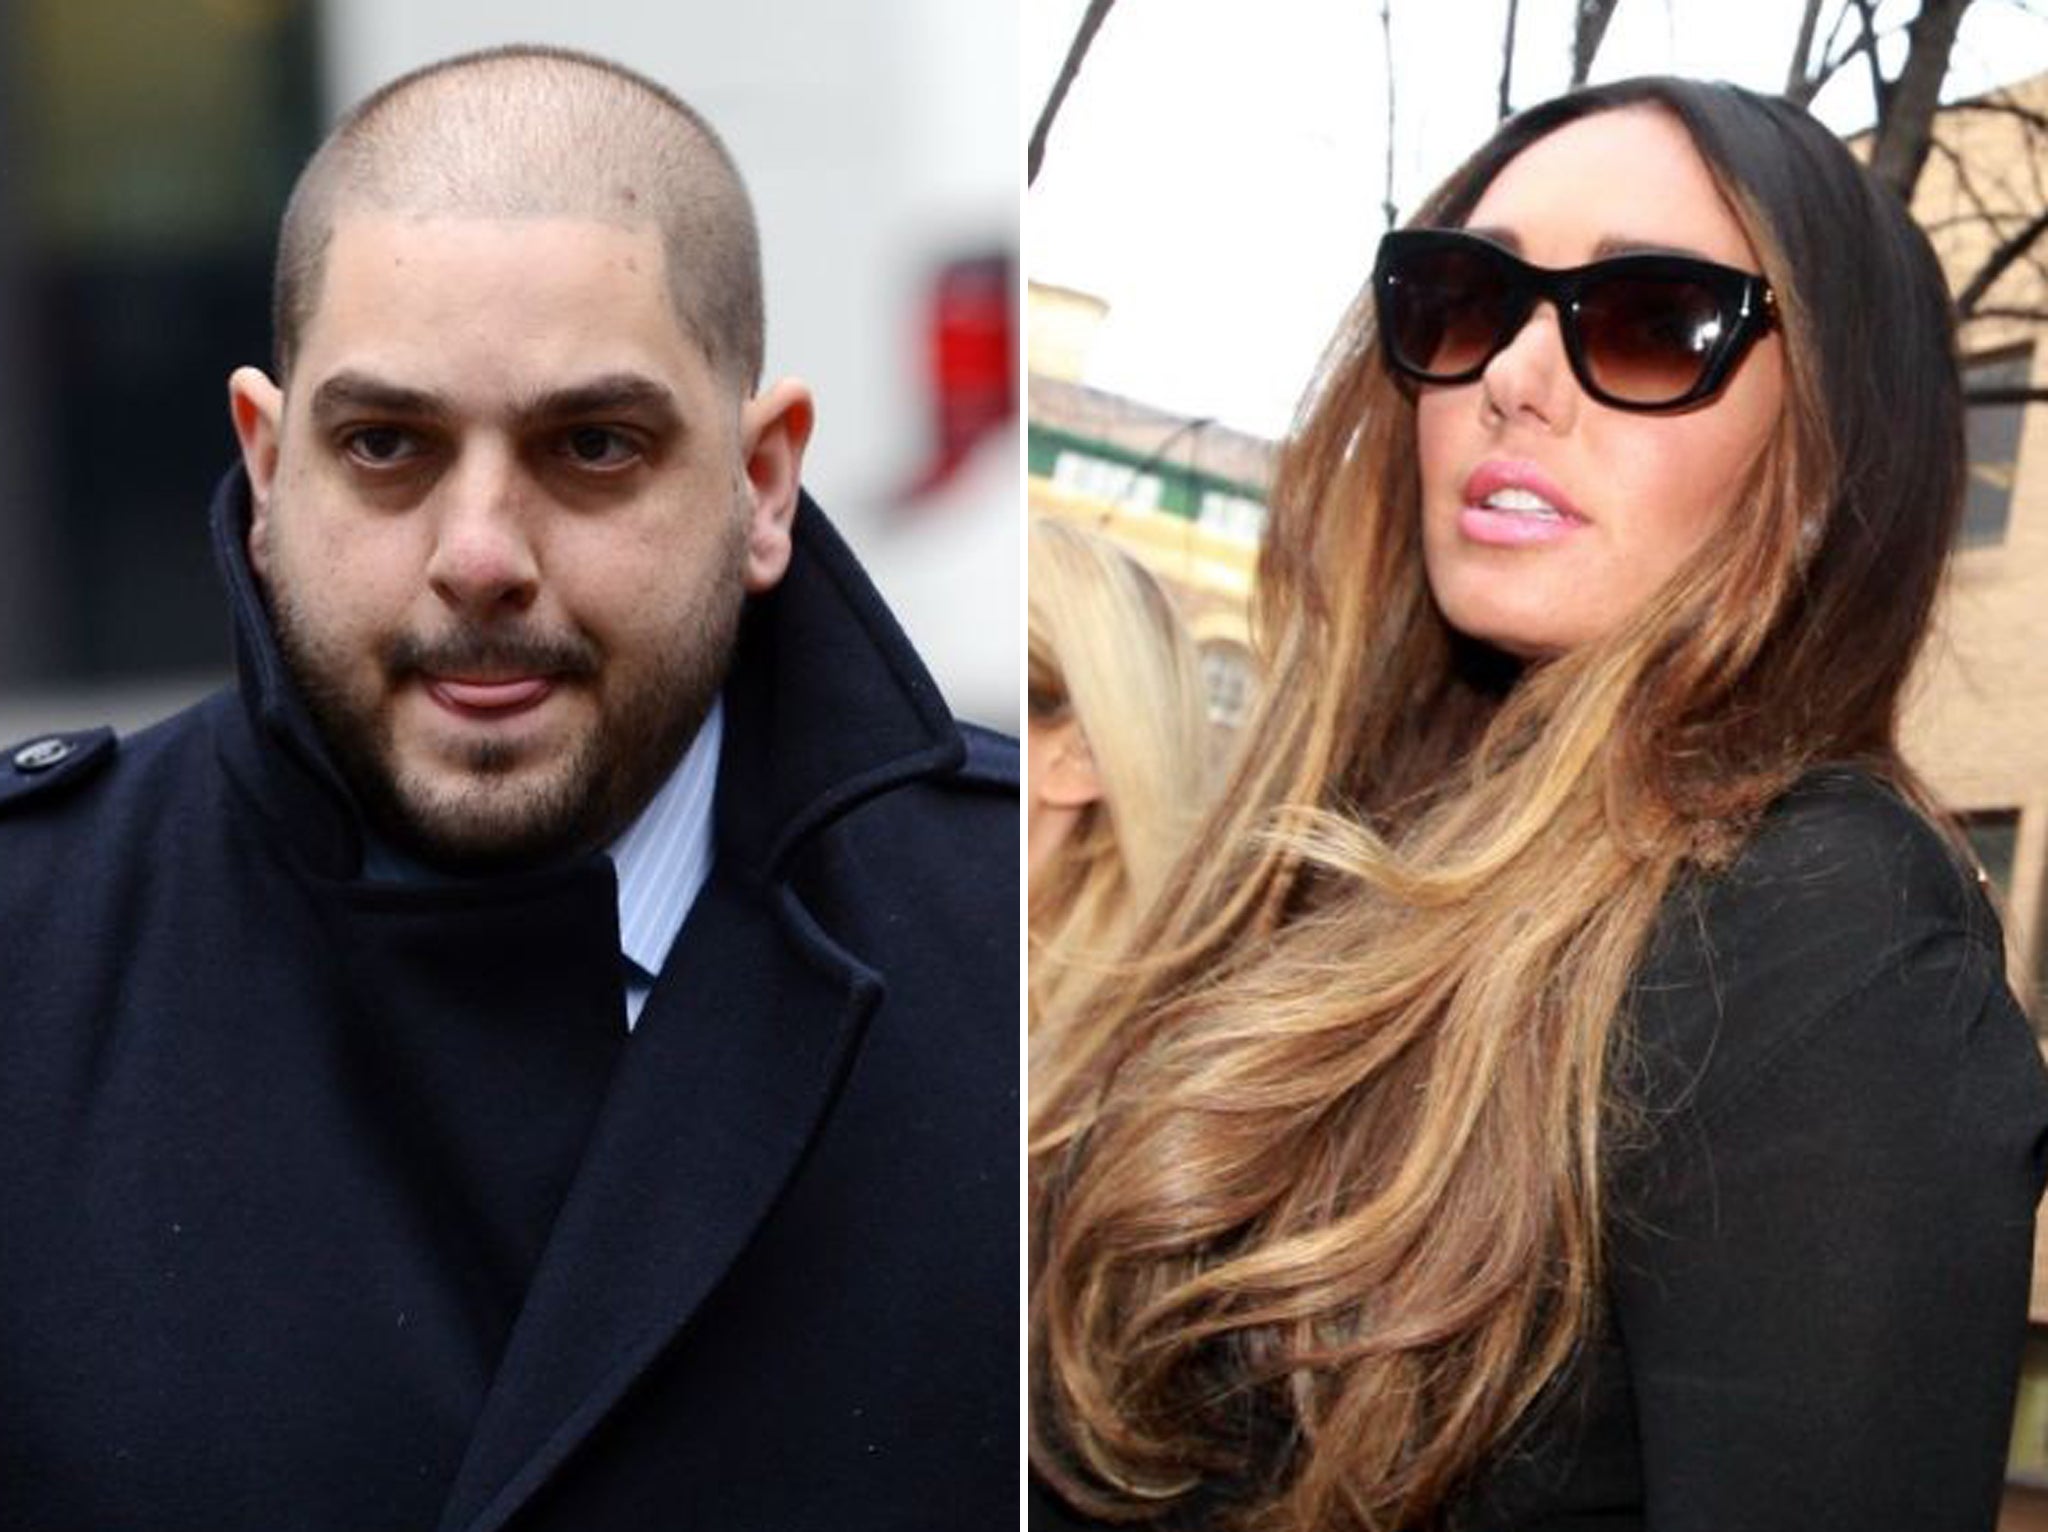 Derek Rose (left), the former fiance of Tamara Ecclestone (right), has been found guilty of blackmailing her